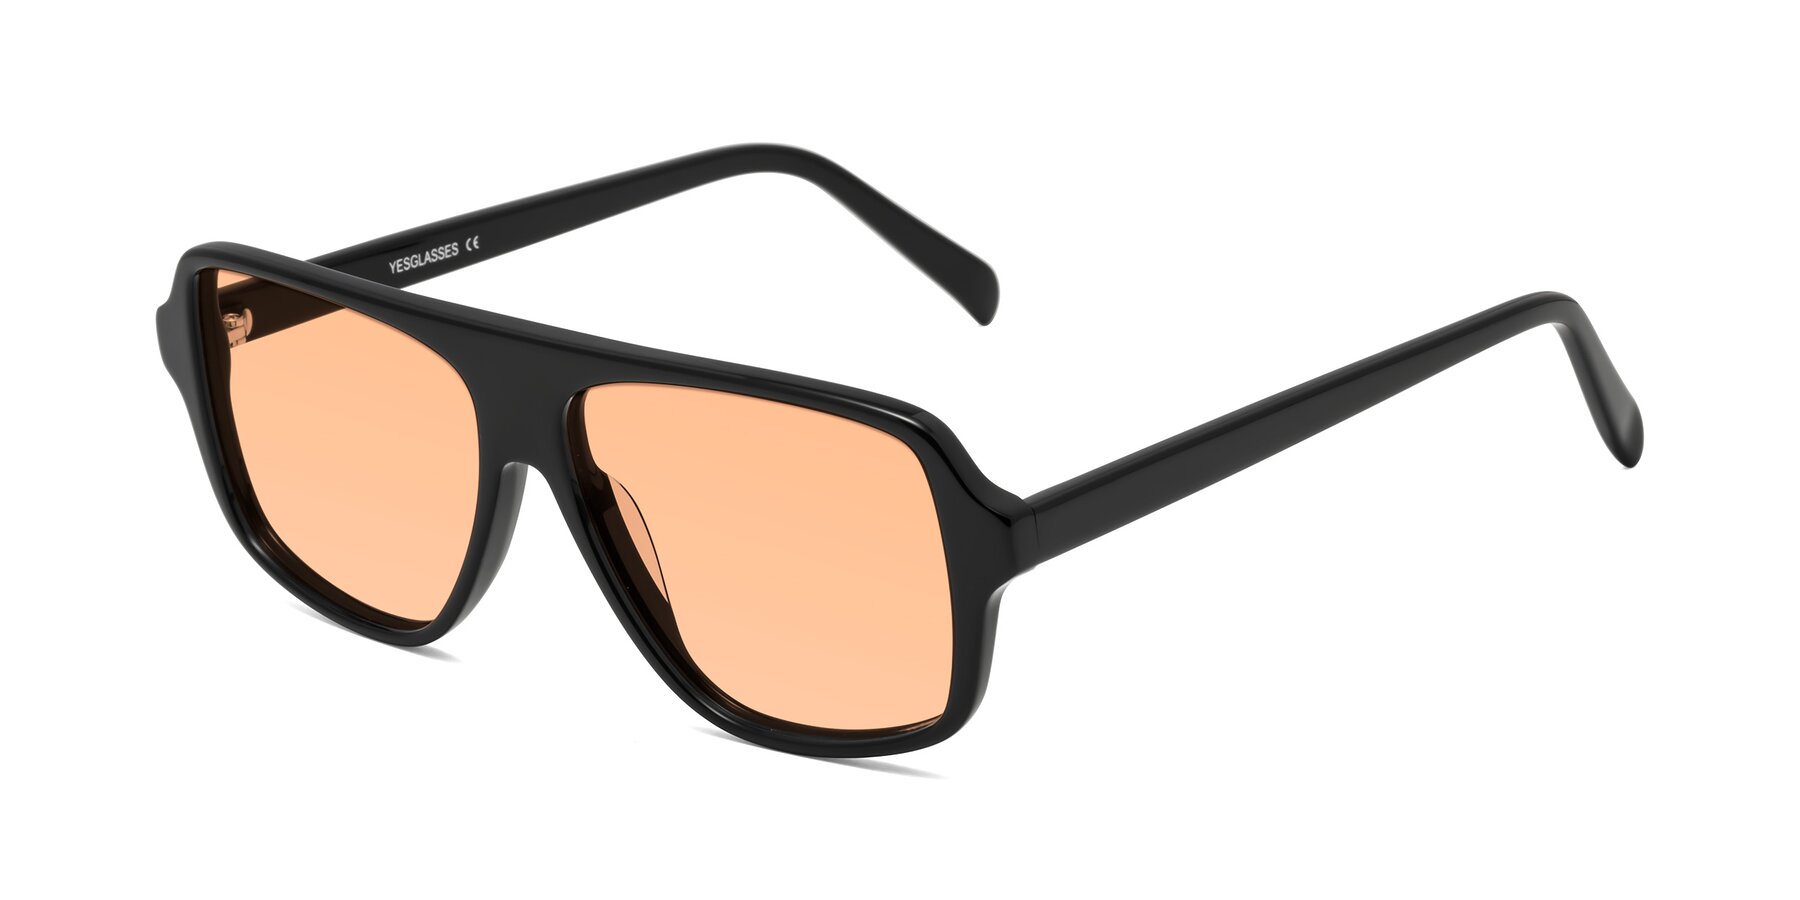 Angle of O'Leary in Black with Light Orange Tinted Lenses